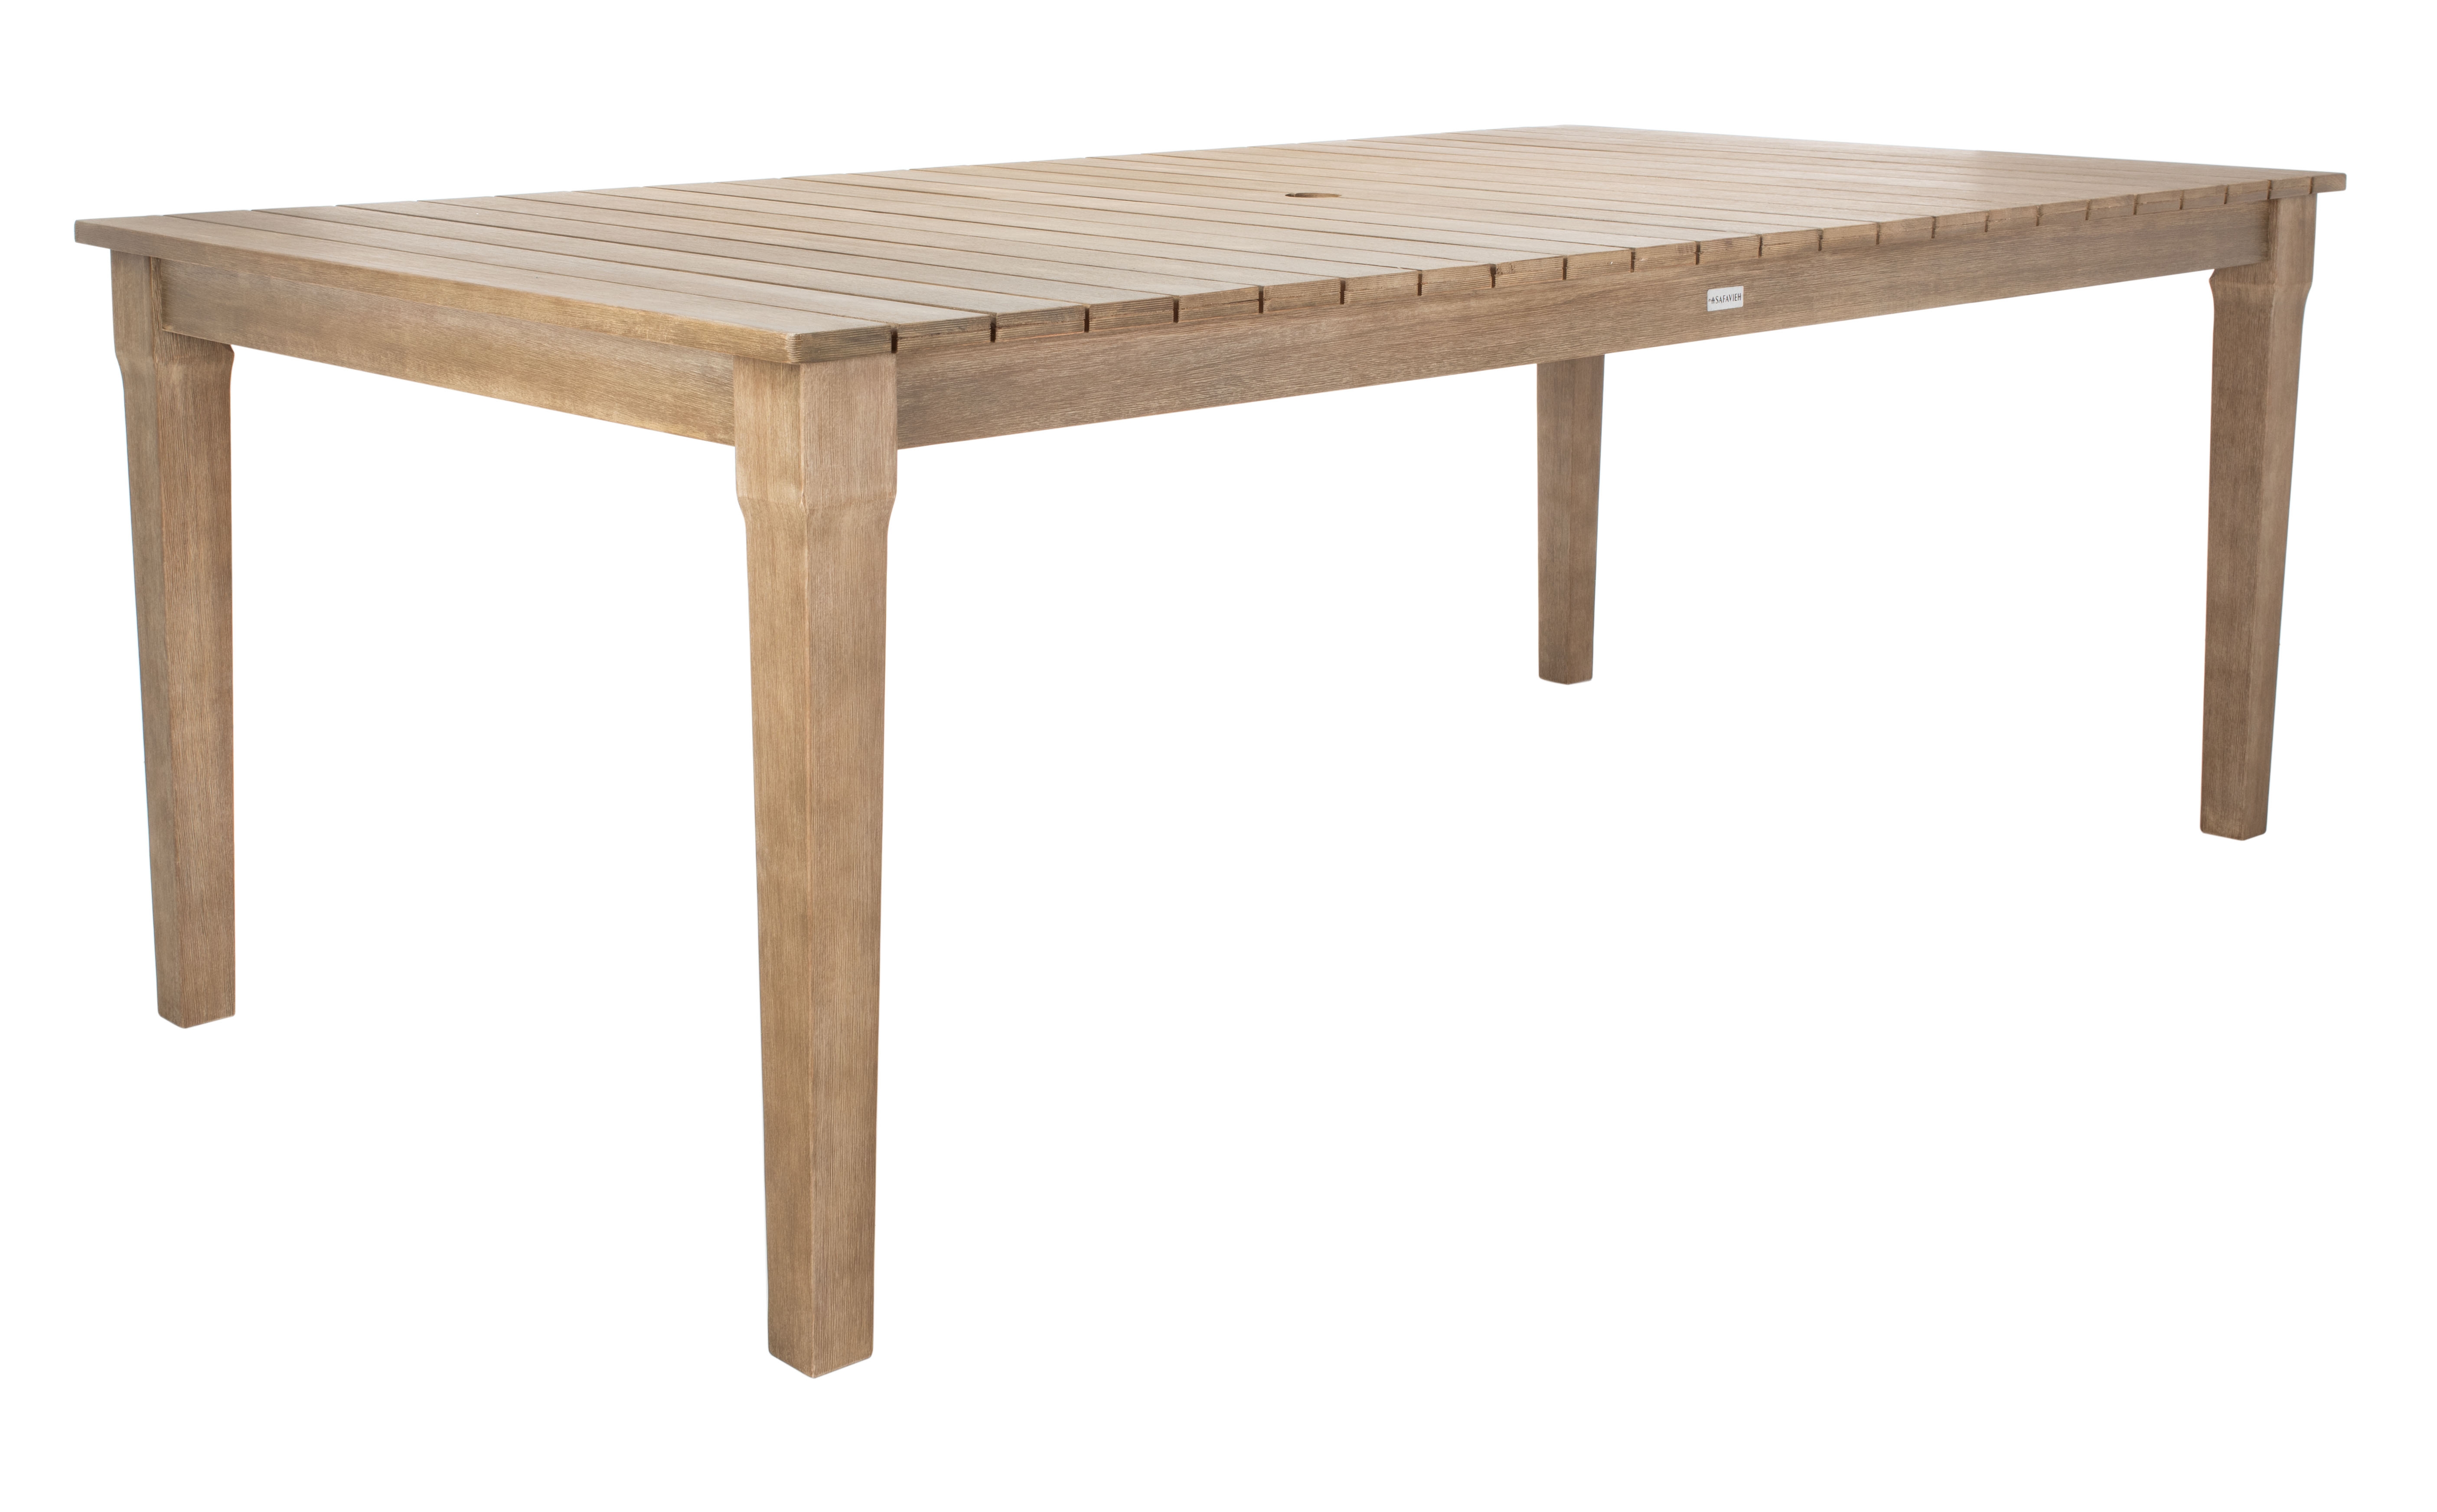 Dominica Wooden Outdoor Dining Table - Natural - Arlo Home - Image 4